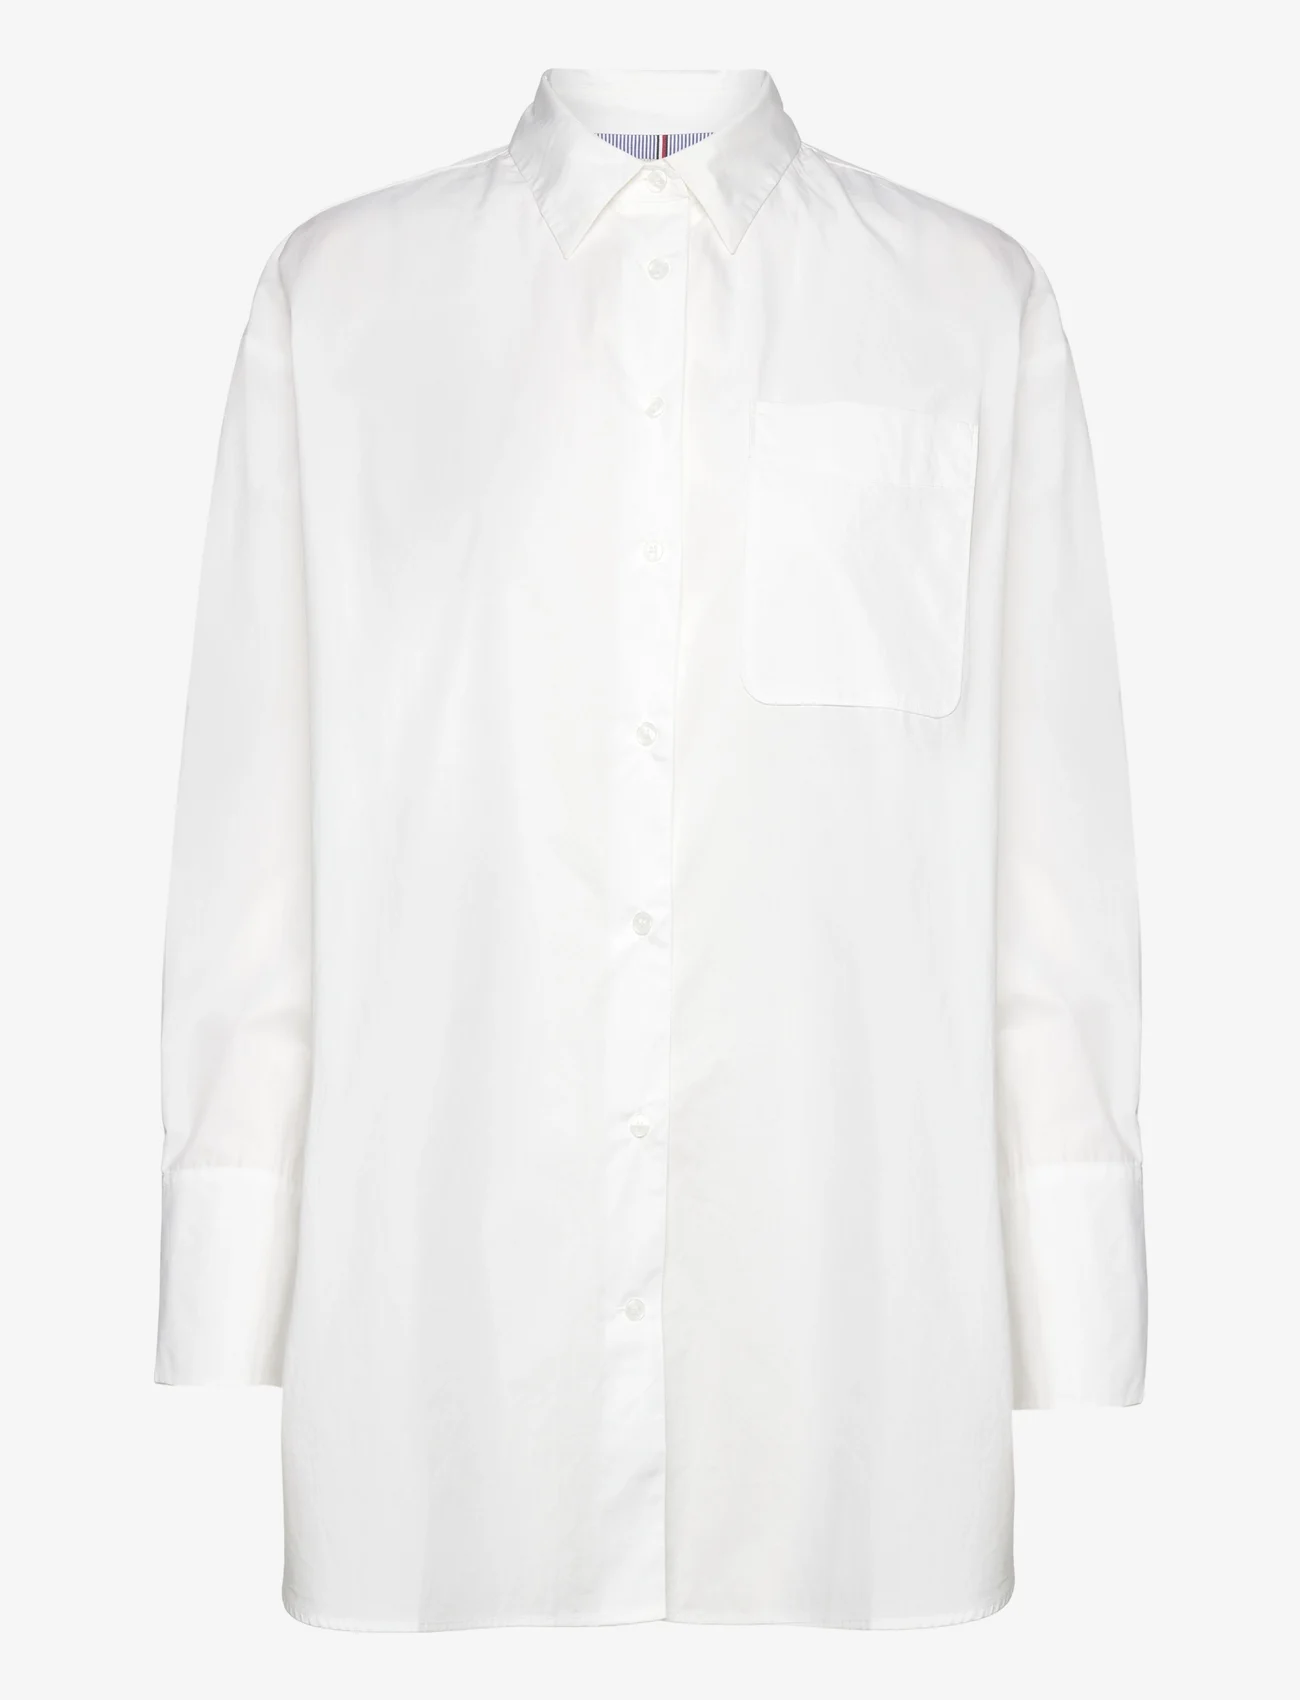 Tommy Hilfiger - ESS POPLIN LOOSE FIT SHIRT - long-sleeved shirts - th optic white - 0